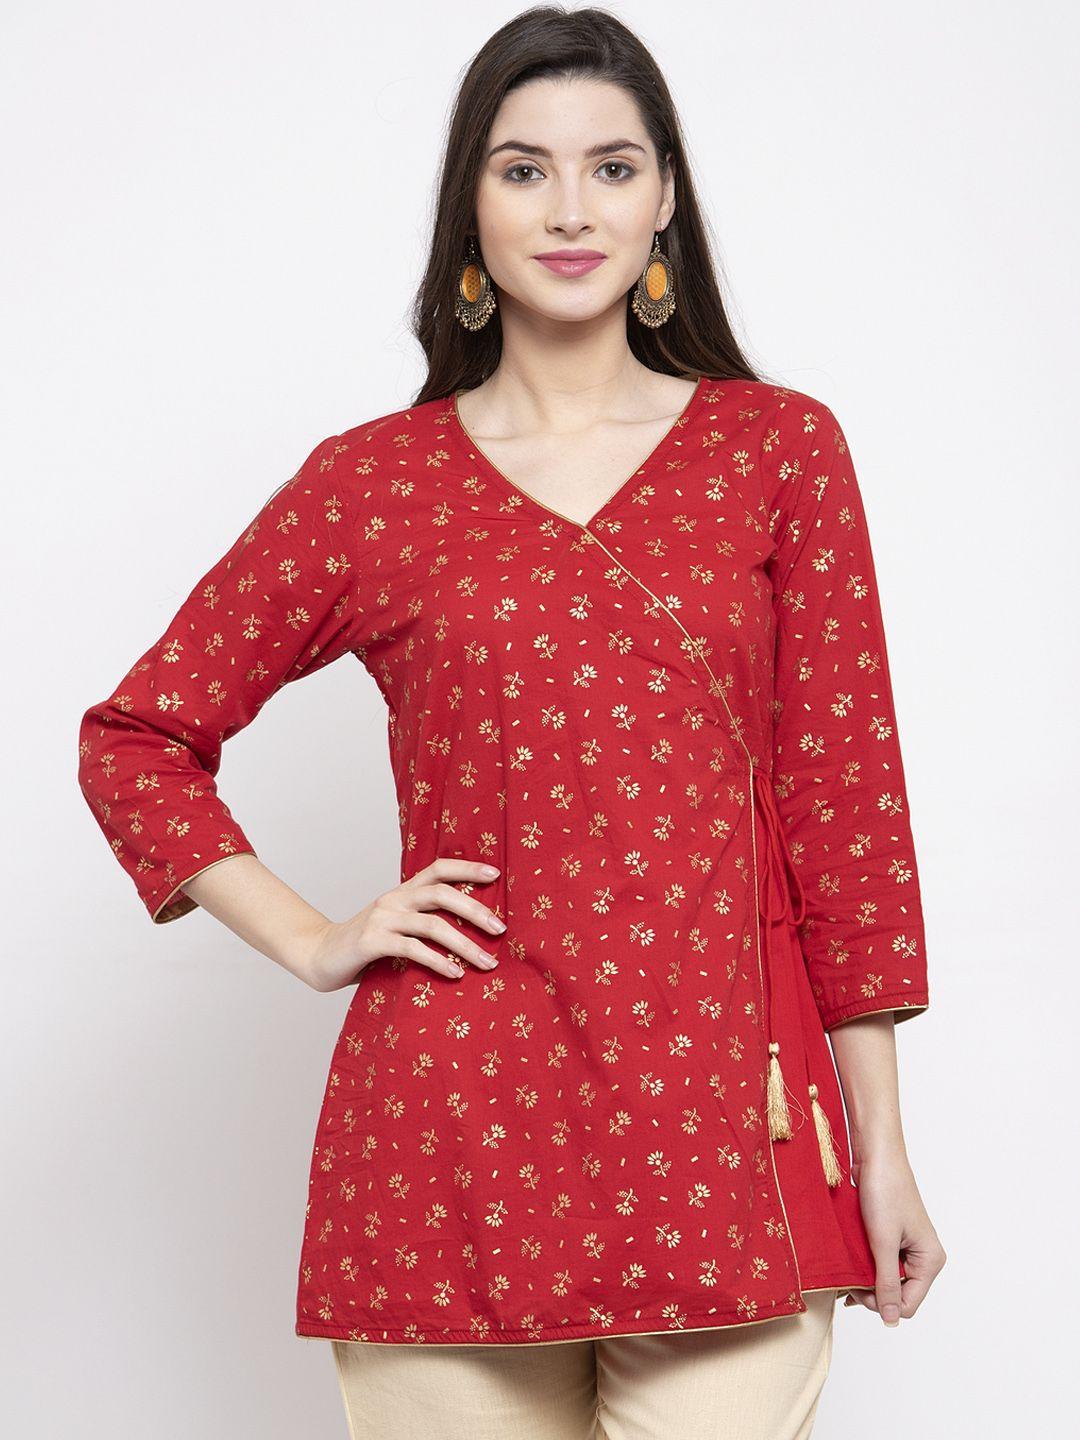 bhama-couture-women-red-&-golden-foil-print-angrakha-tunic